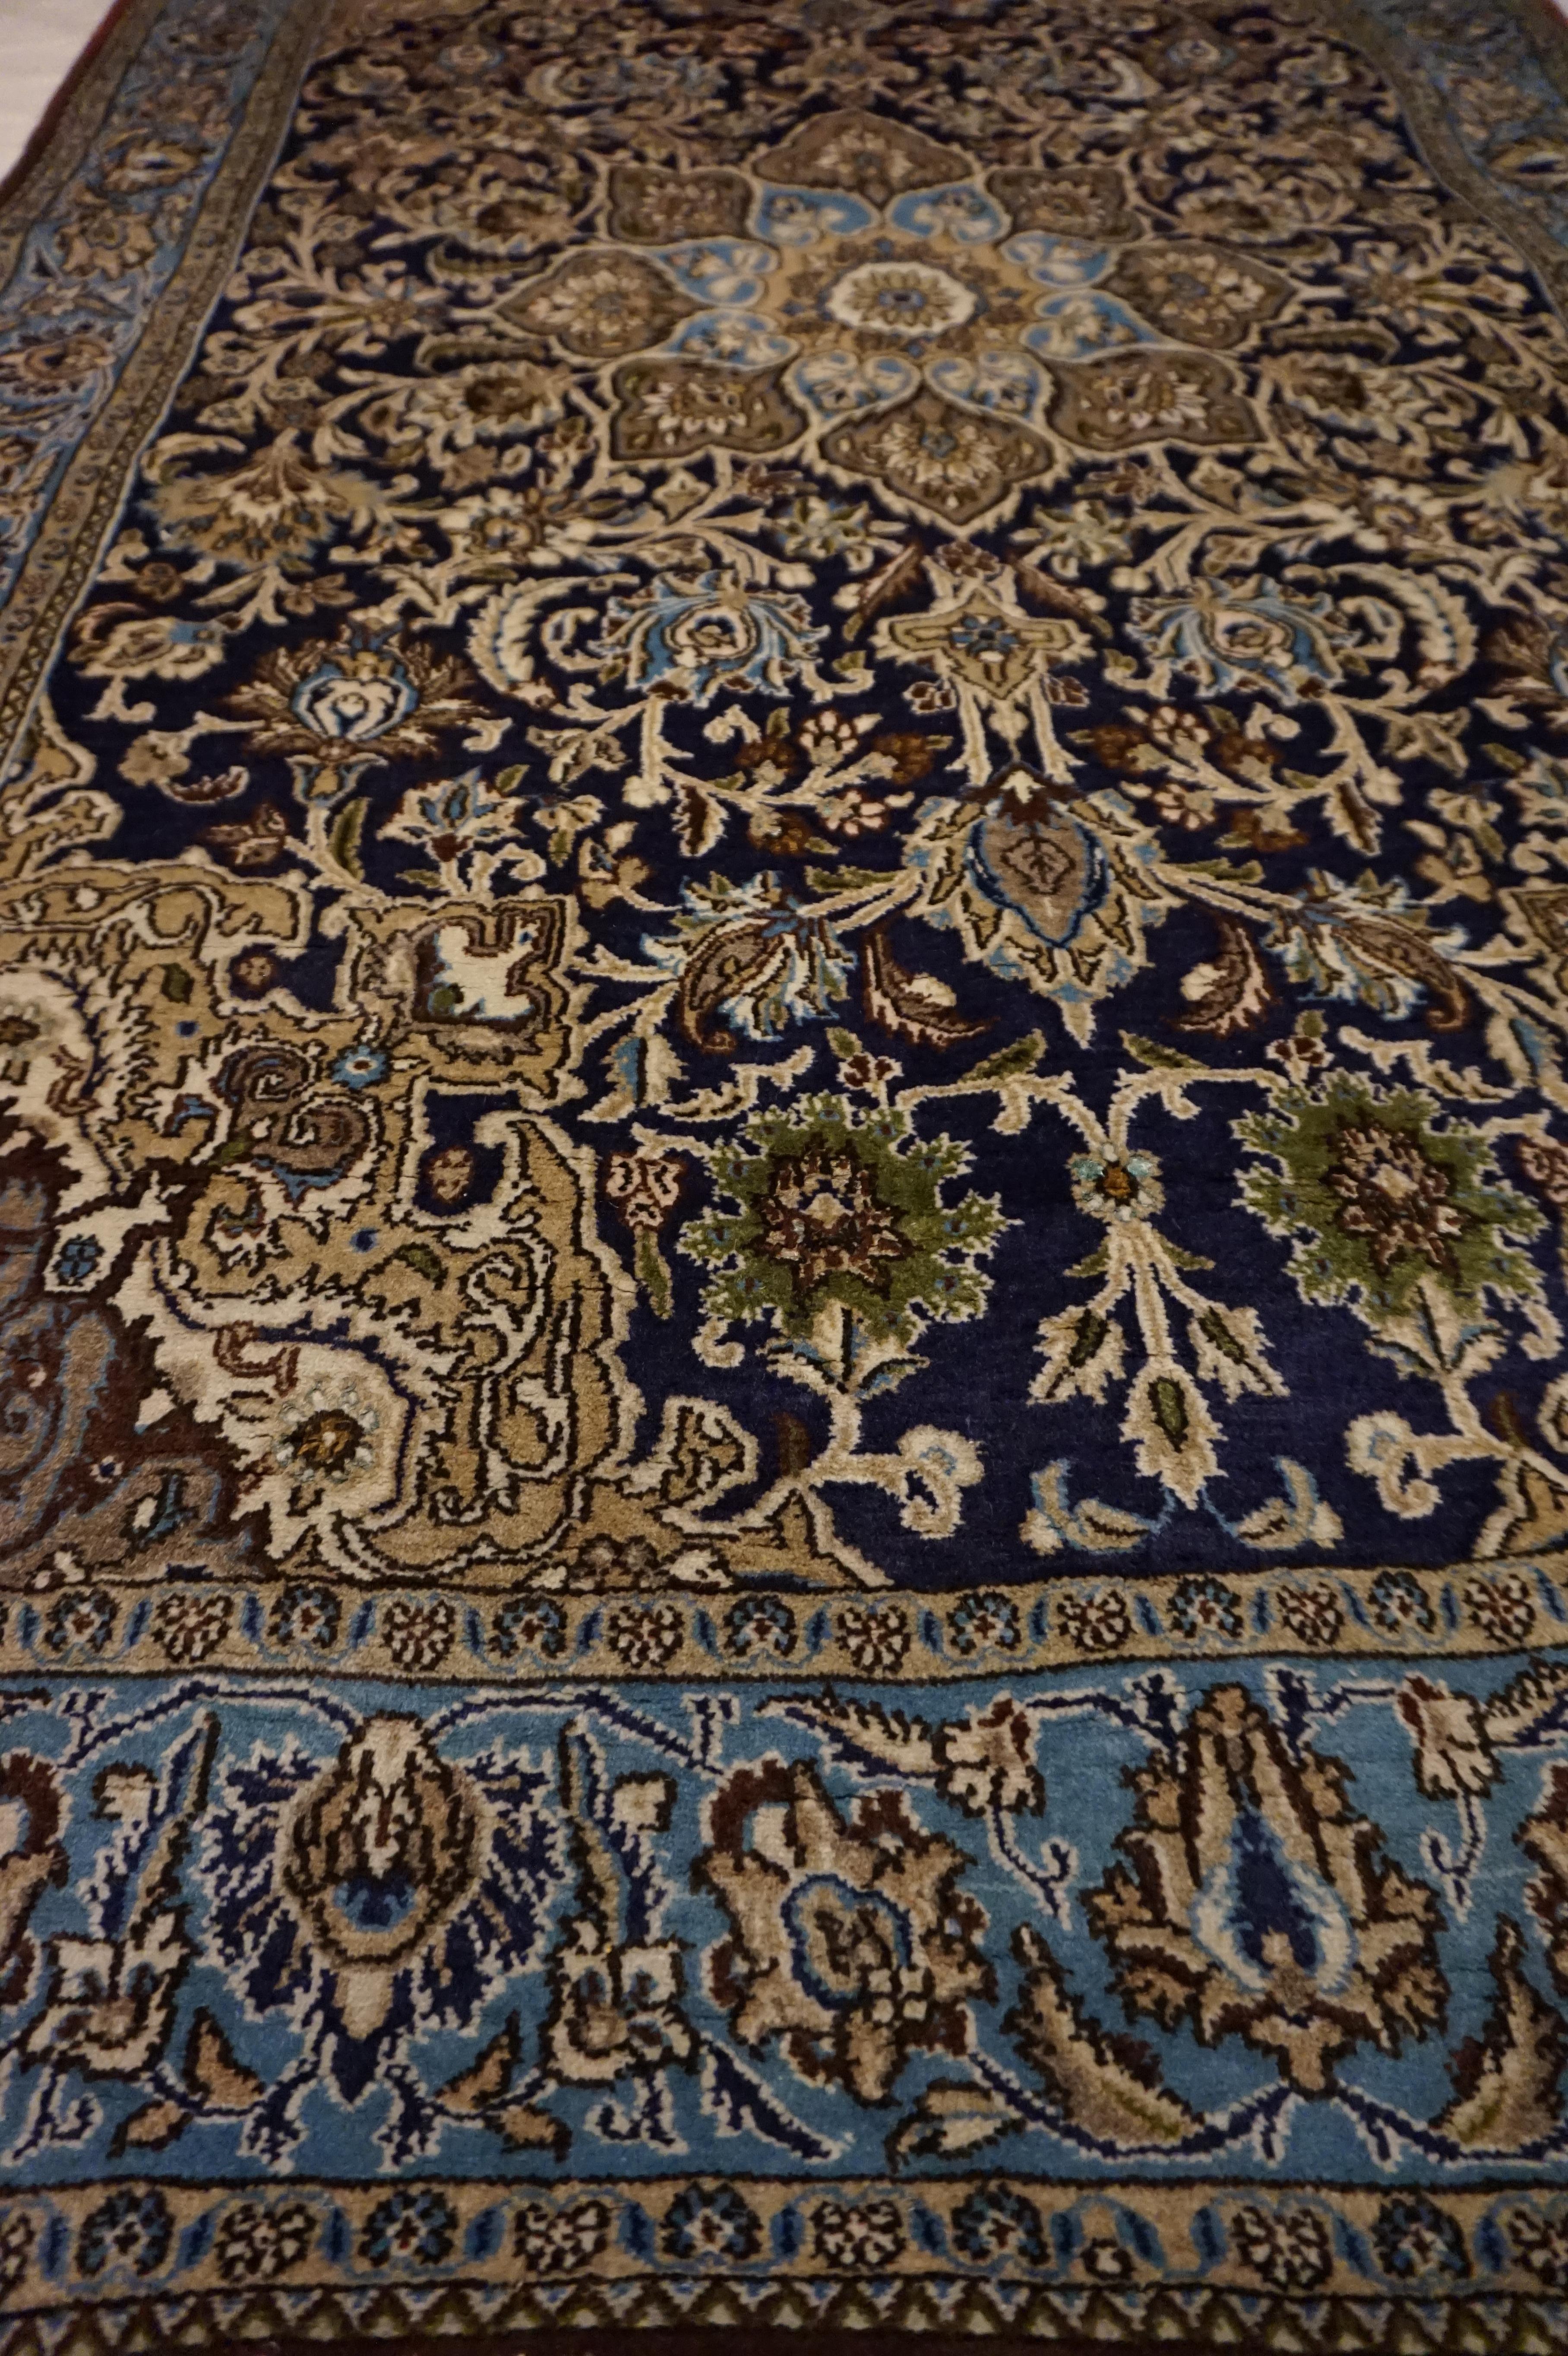 Antique Kashmir Kashan Rug Hand-knotted In Pure Wool In Indigo, Blues & Browns In Good Condition For Sale In Vancouver, British Columbia